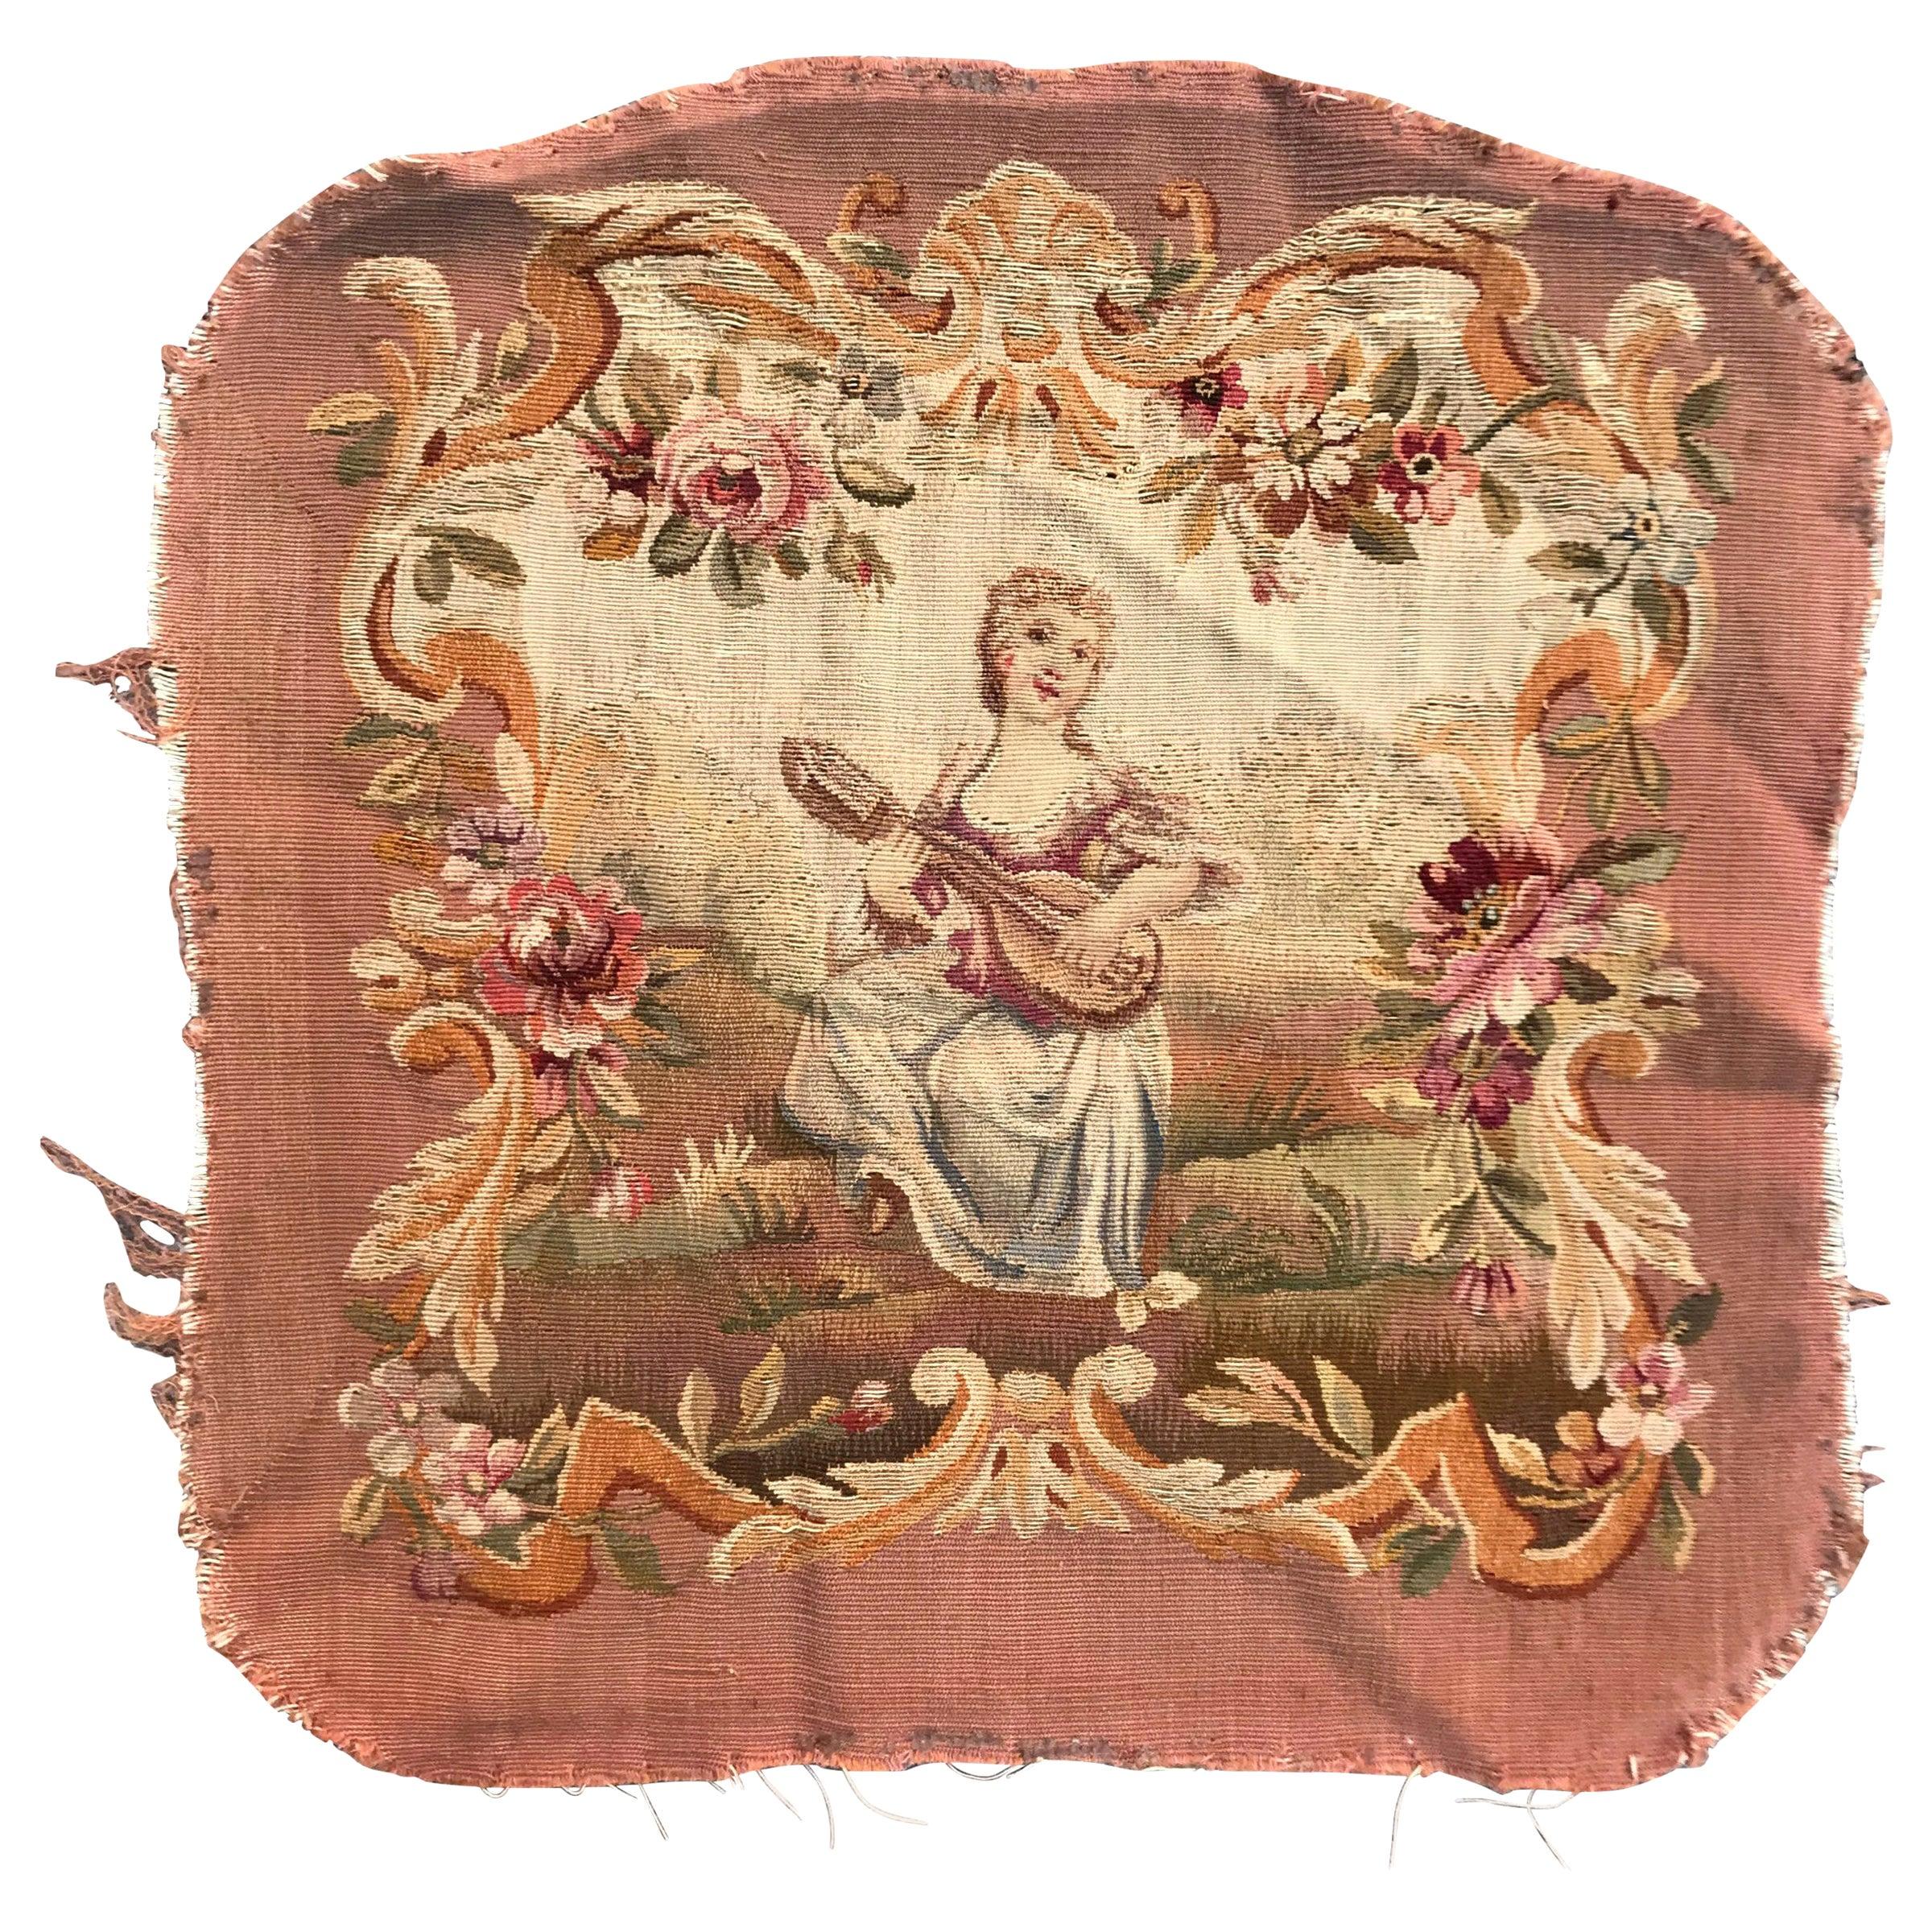 Bobyrug's Antique Aubusson Cushion Chair Cover Tapestry (Tapisserie)